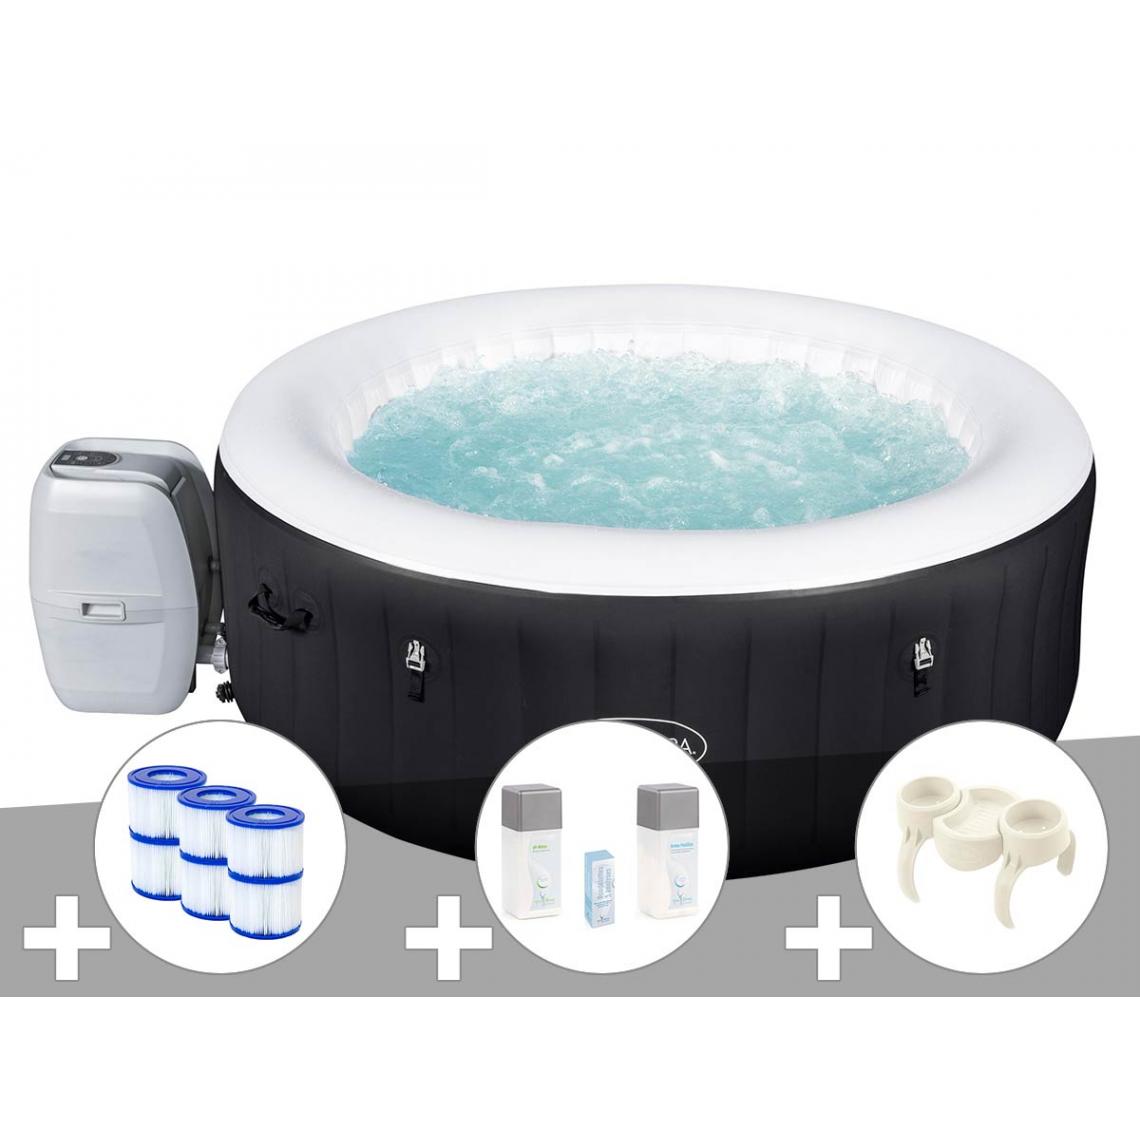 Bestway - Kit spa gonflable Bestway Lay-Z-Spa Miami rond Airjet 4 places + 6 filtres + Kit traitement brome + Porte-gobelets - Spa gonflable